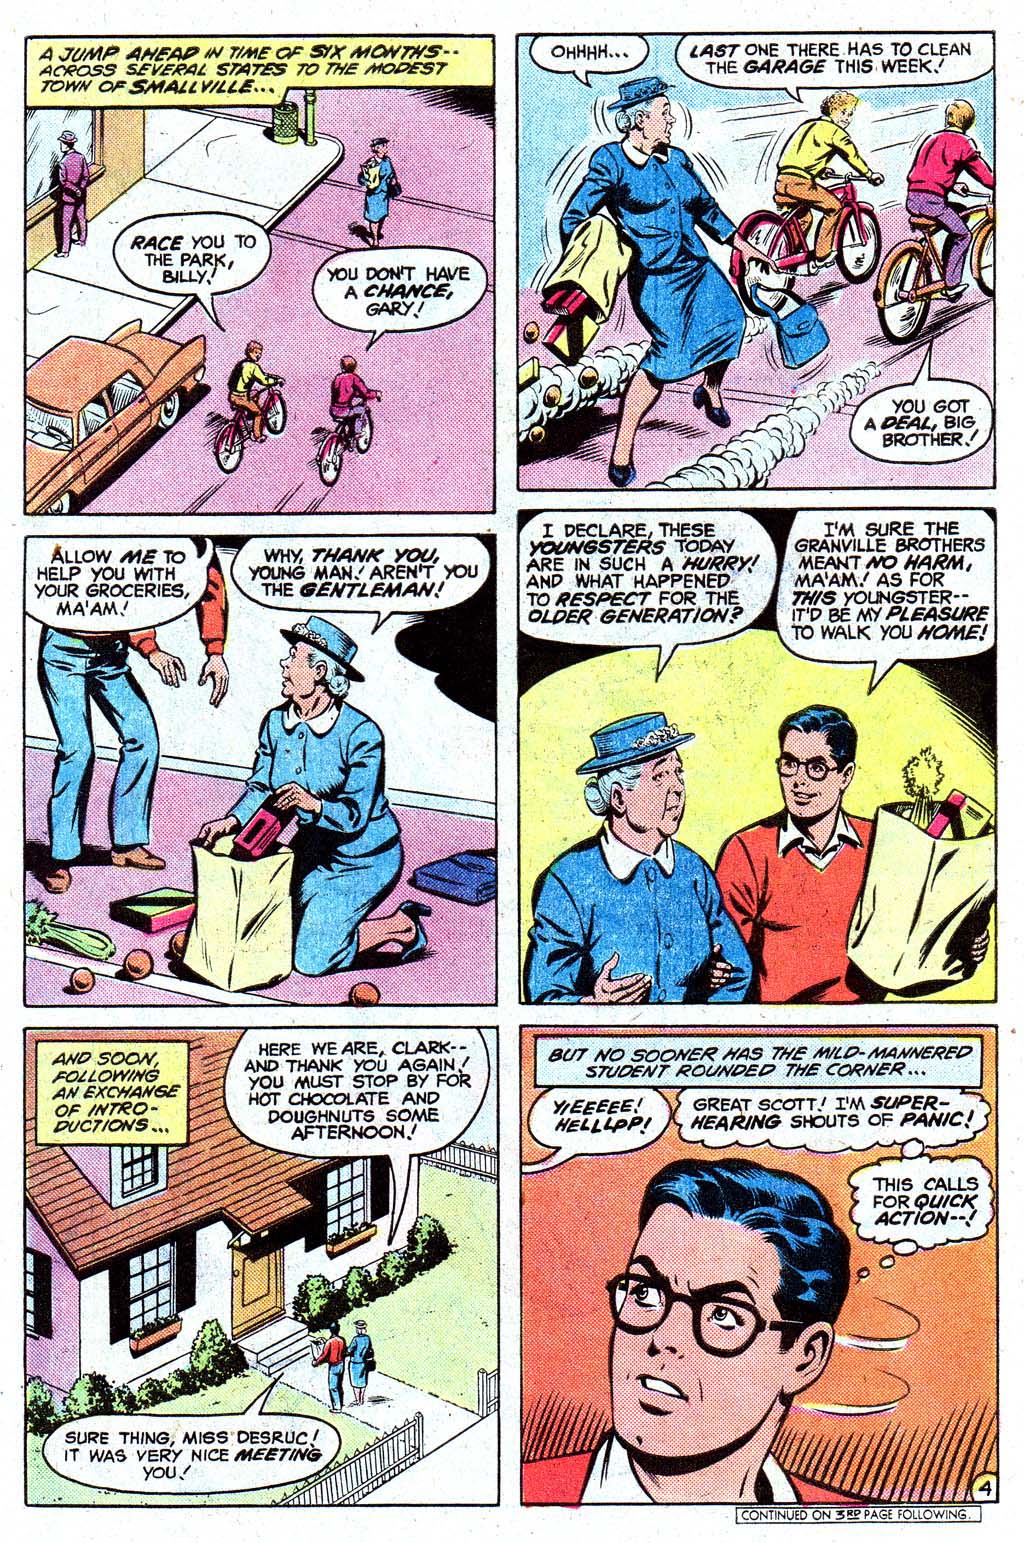 The New Adventures of Superboy 30 Page 5